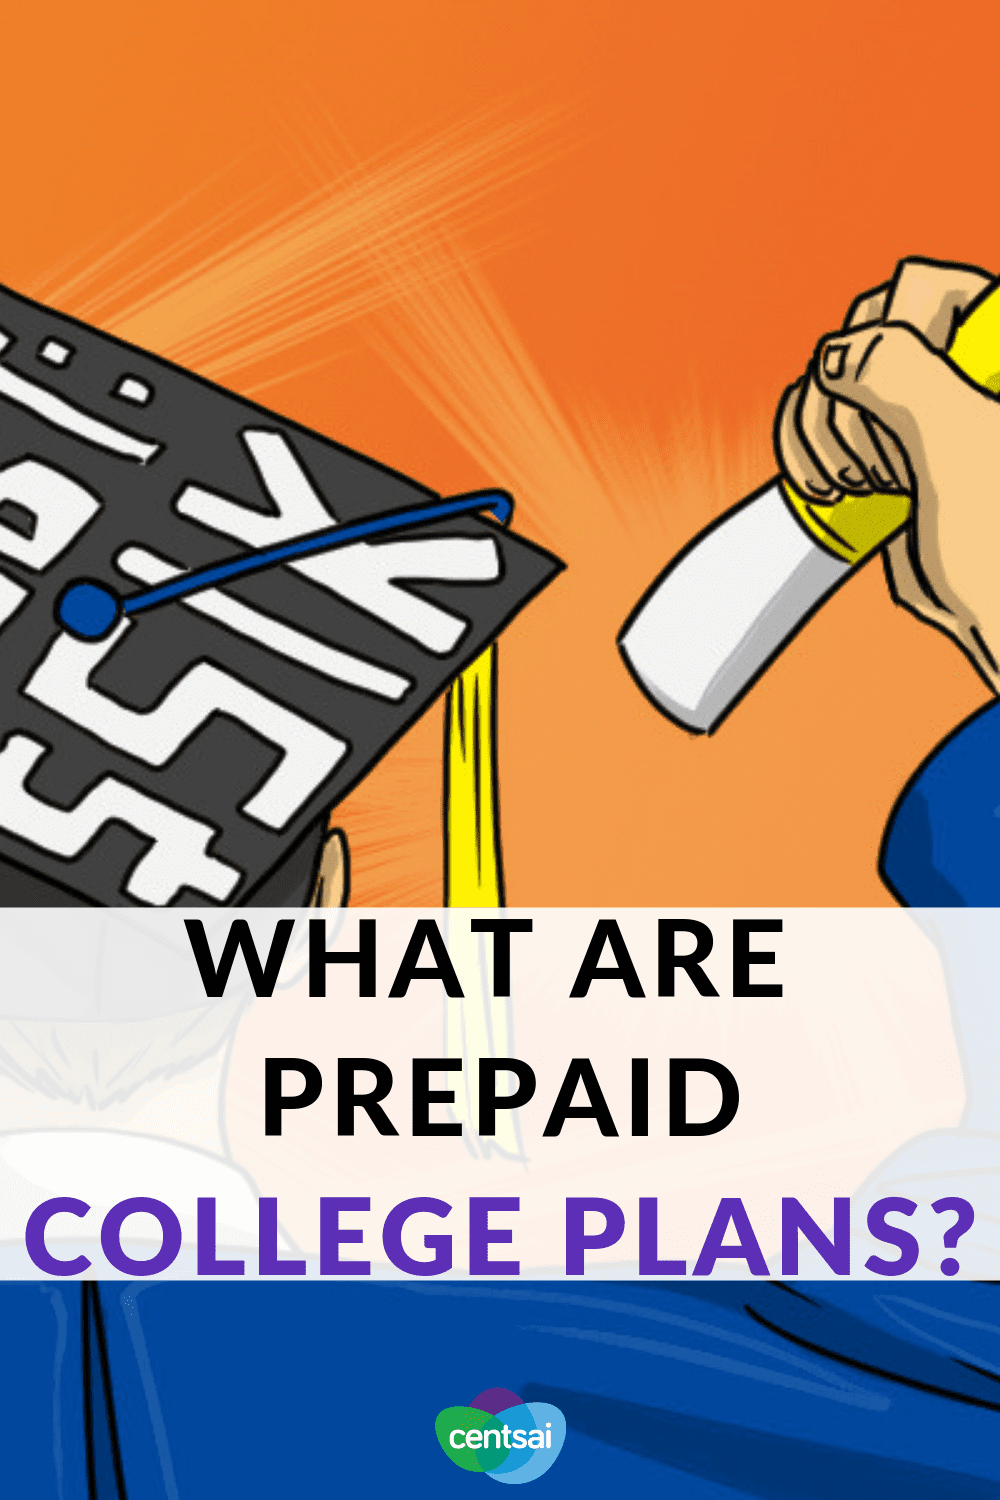 What Are Prepaid College Plans? Do you want to save money to help your kid go to college? Prepaid college plans can help. Learn what they are and how they work. #financialplanning #college #savemoney #savingmoneytips #collegeplan #prepaidcollege